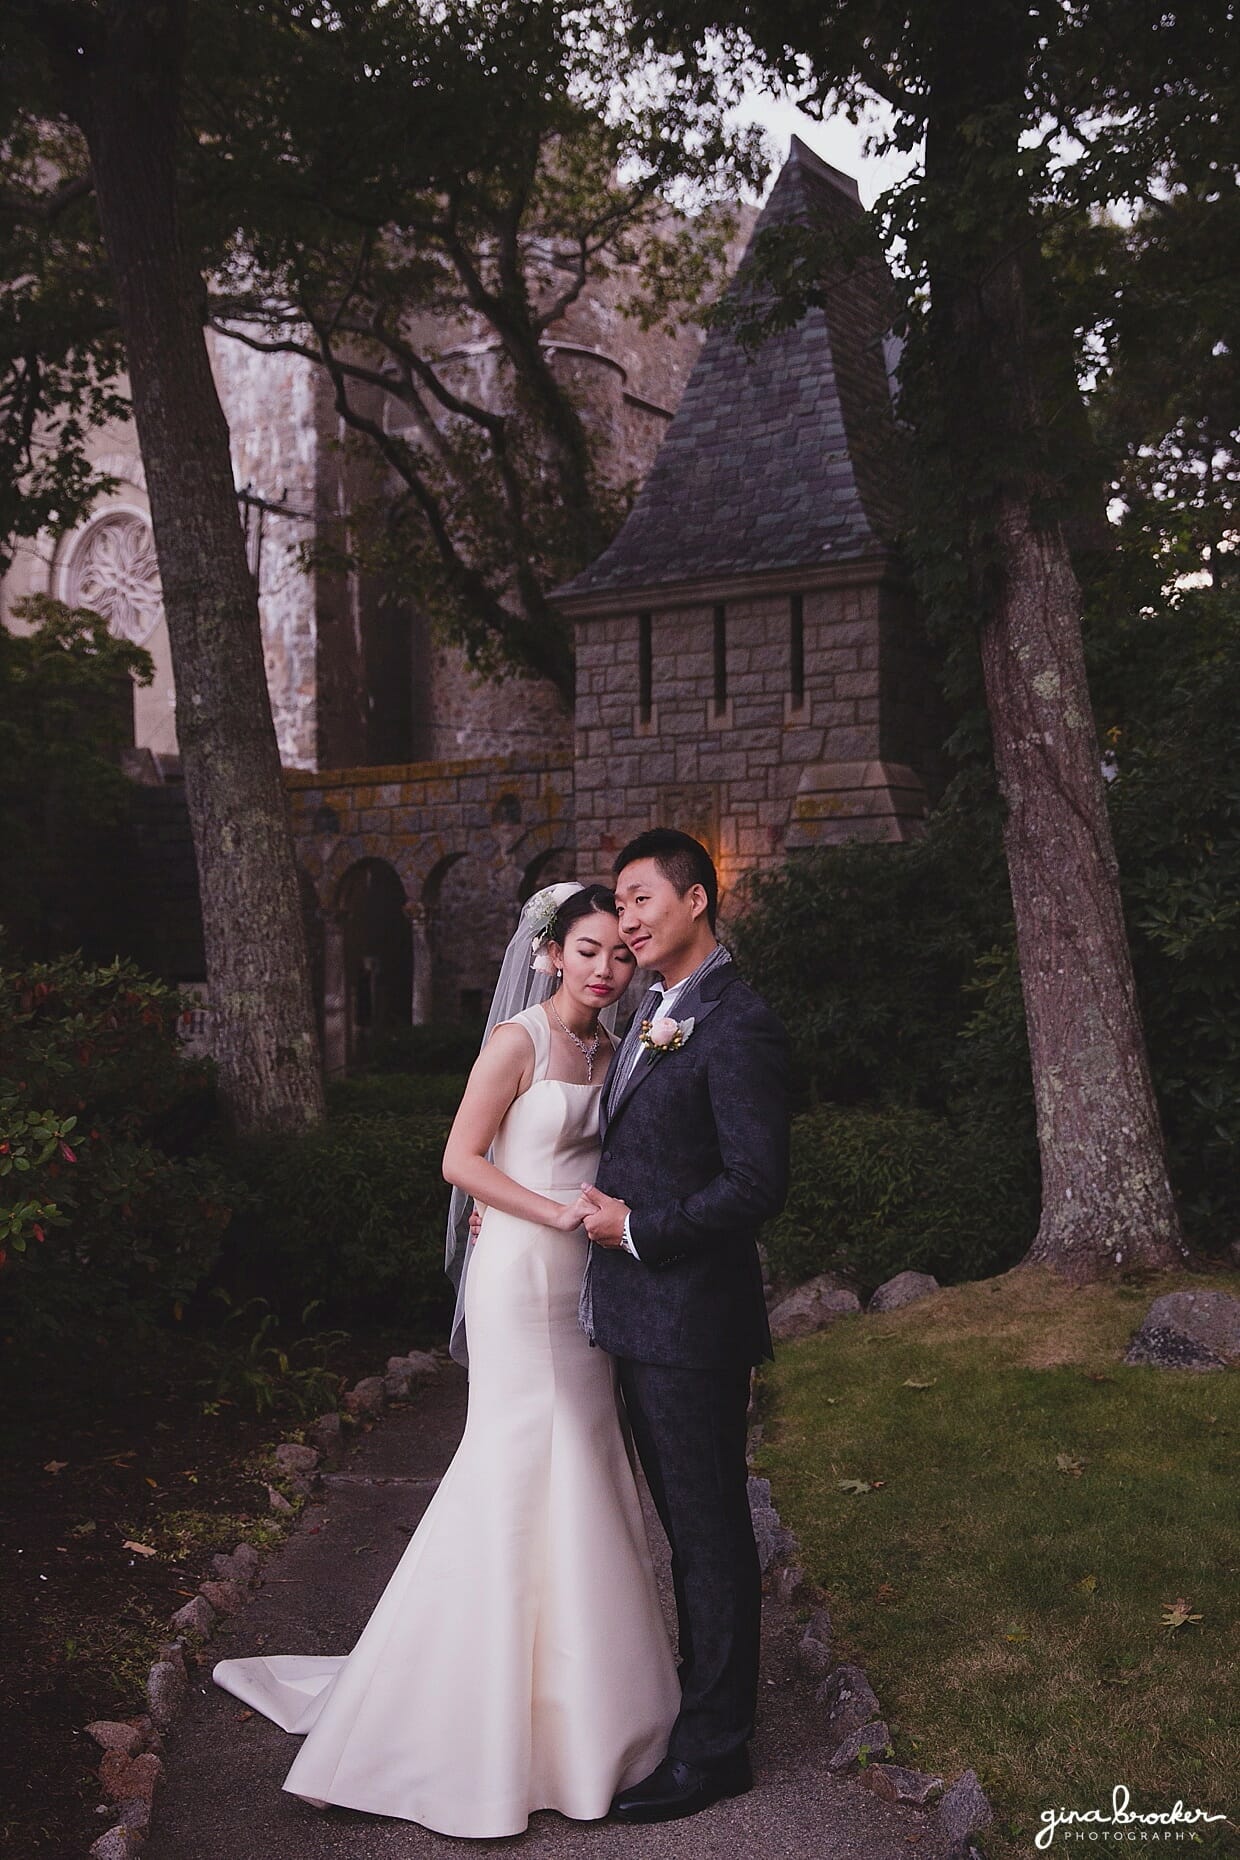 A sunset portrait of a bride and groom wearing an Amsale wedding dress and John Varvatos suit during their Hammond Castle wedding in Gloucester, Massachusetts